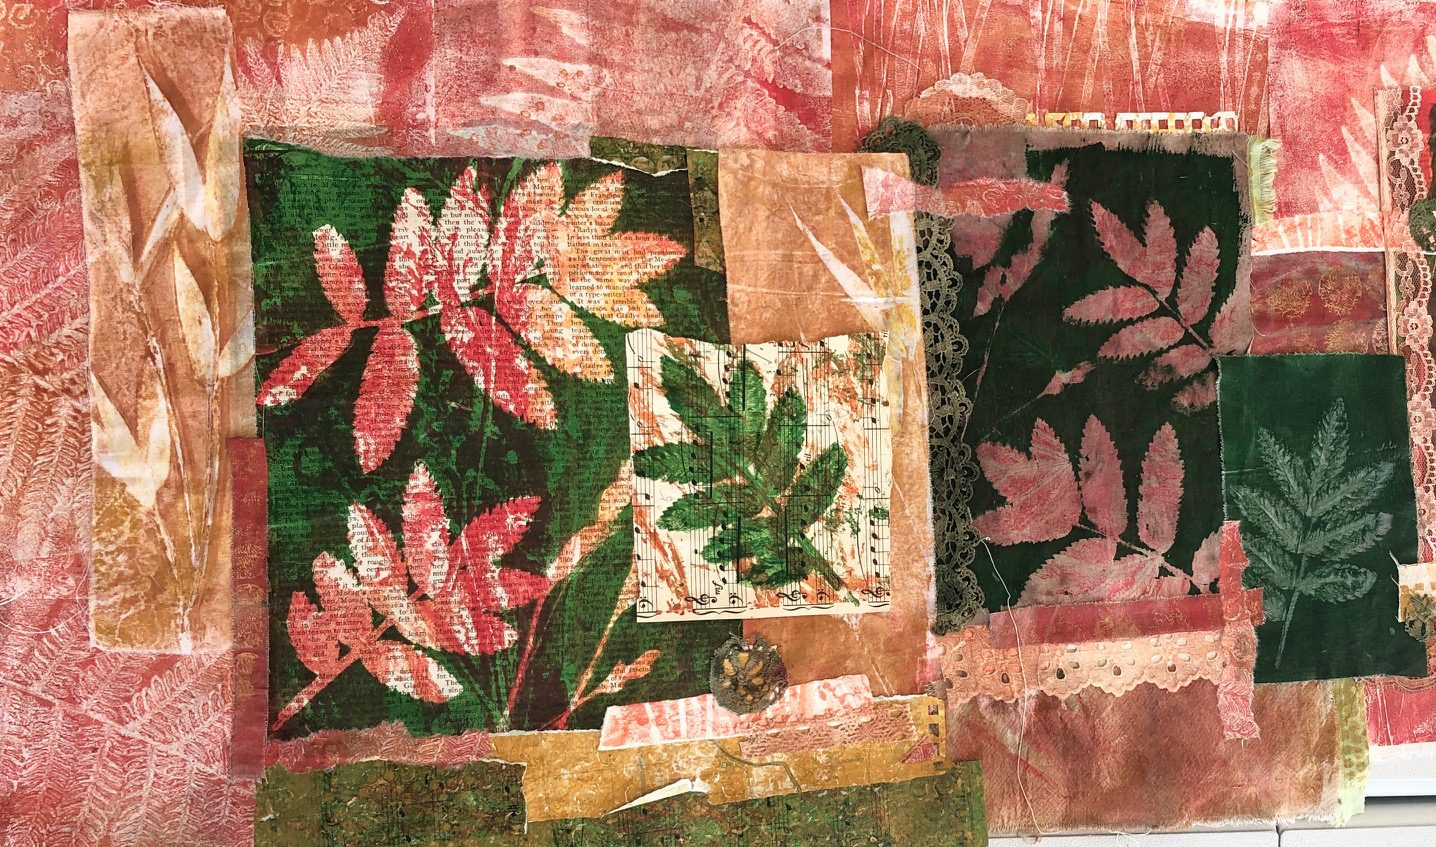 Botanical Printing | A Printmaking Course To Capture The Beauty Of Nature inside How To Make Botnicalprinting